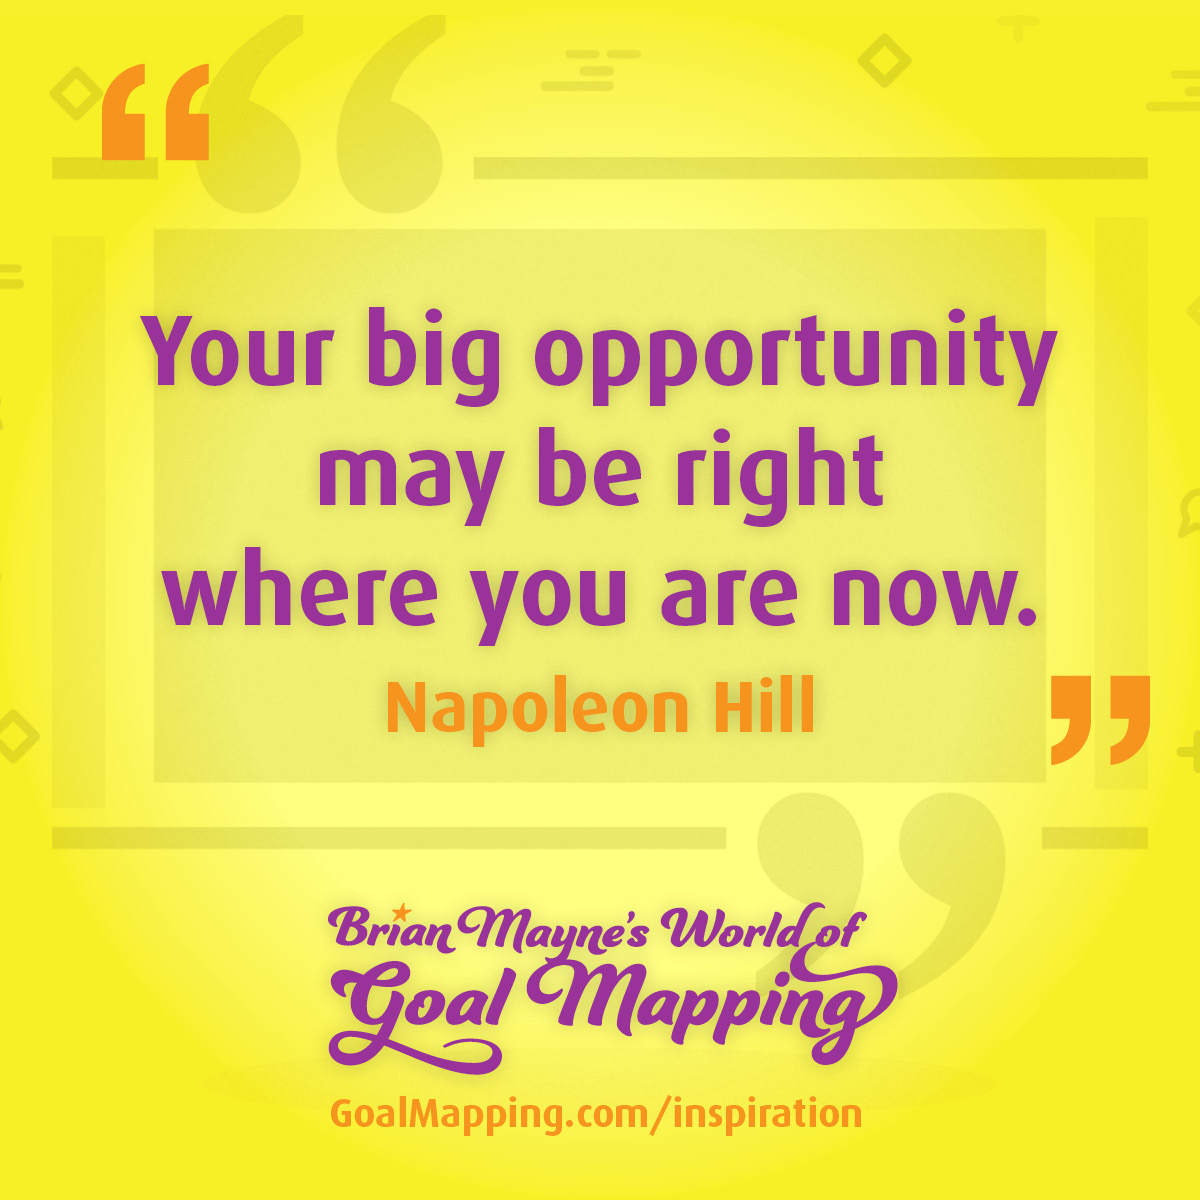 "Your big opportunity may be right where you are now." Napoleon Hill